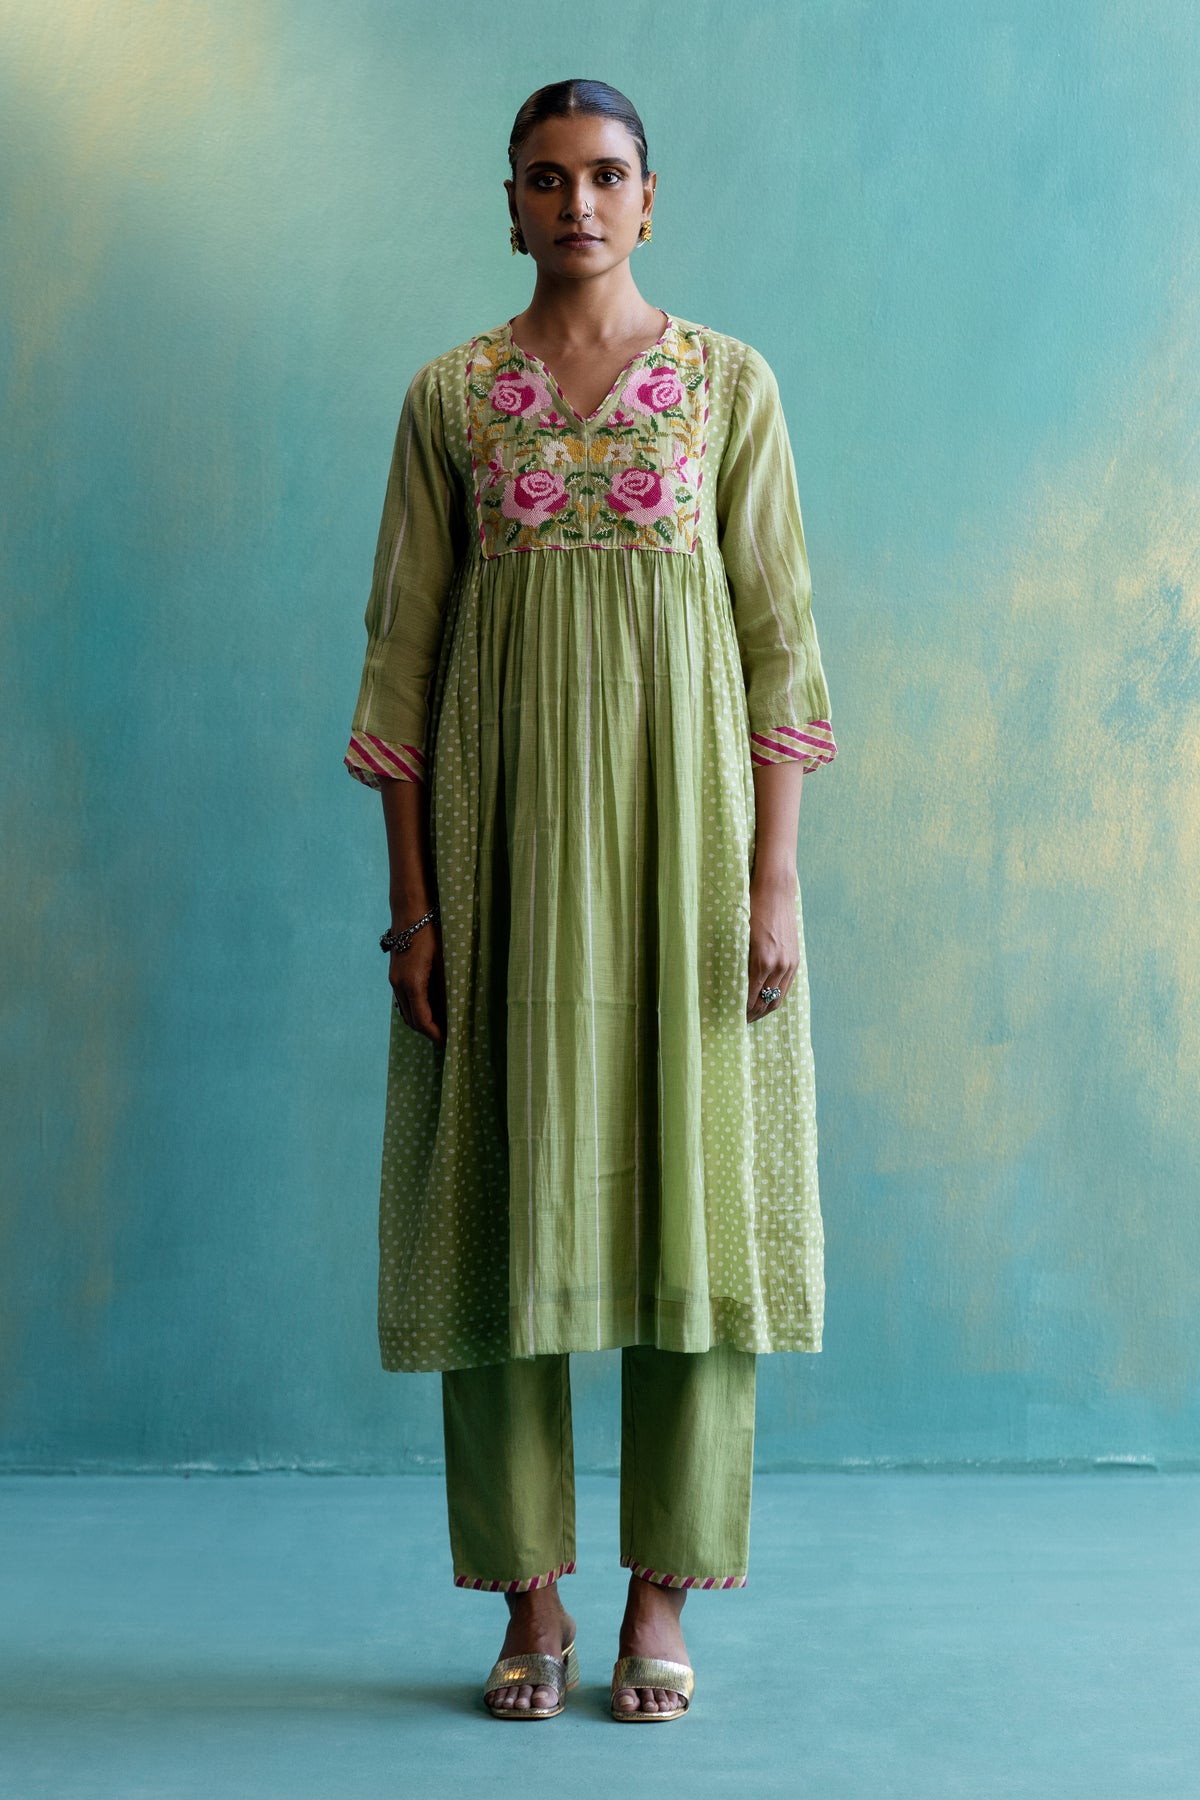 DIL-KASH OLIVE GREEN CHANDERI FRONT AND BACK FLORAL EMBROIDERY WITH SIDE PLEATS AND POLKAS CHANDERI KURTA